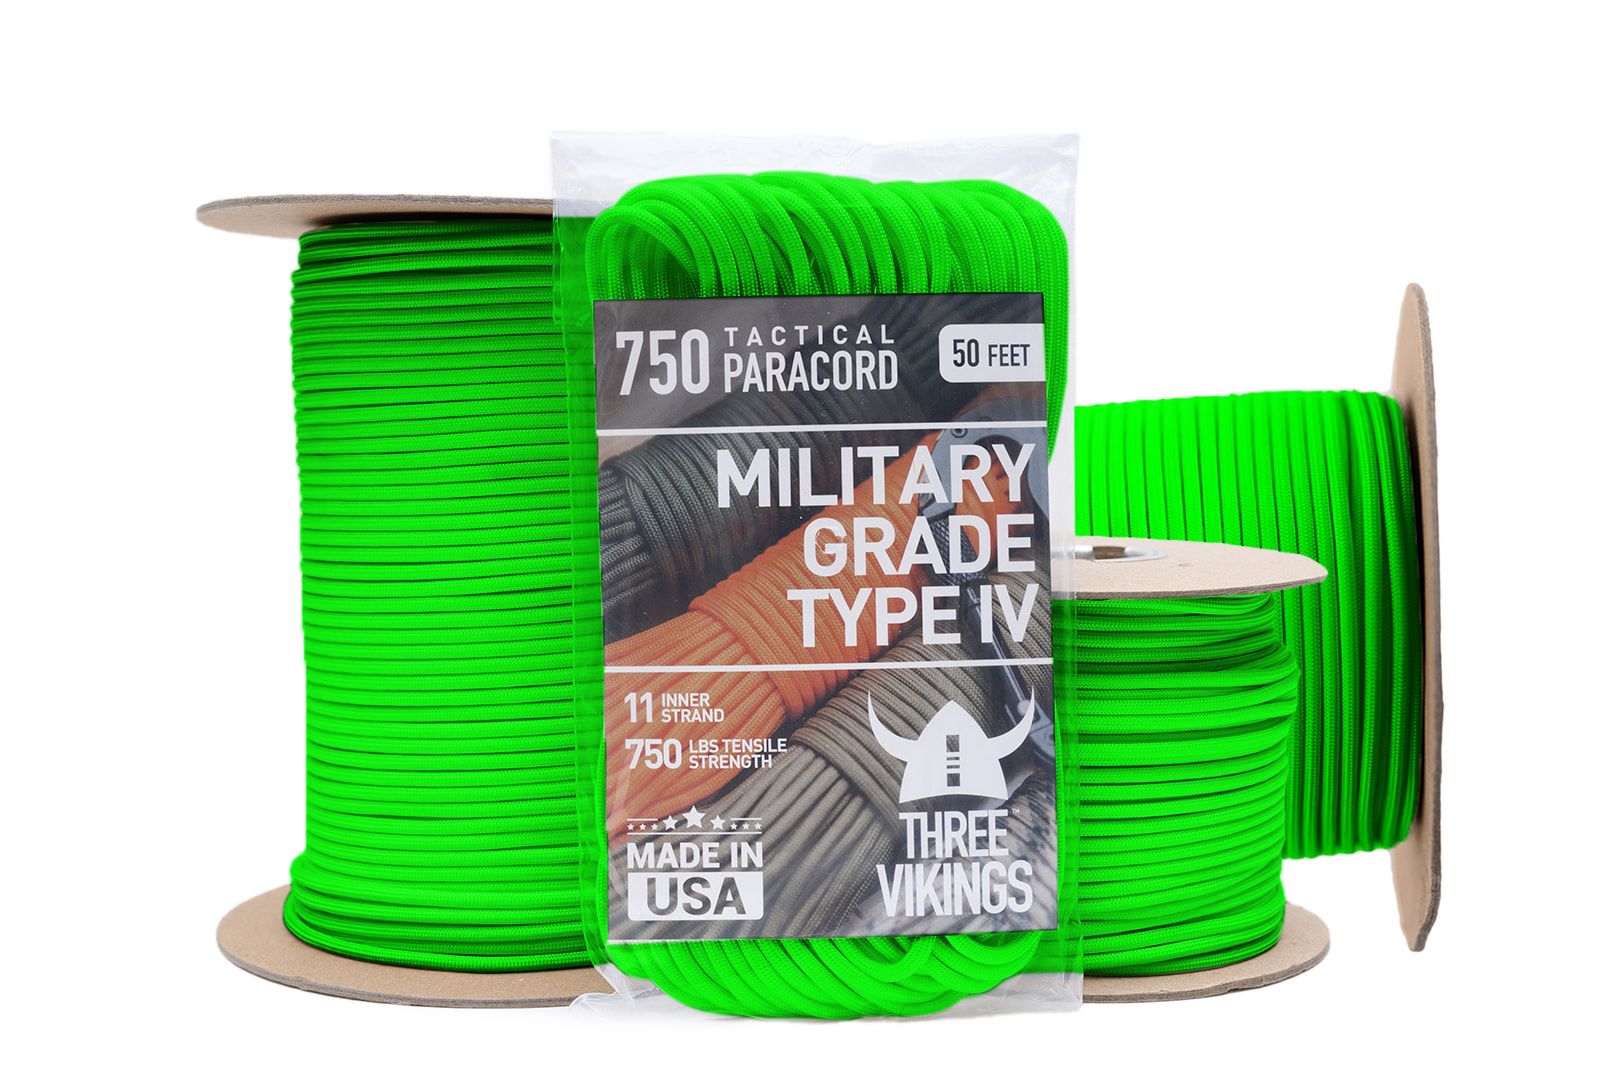 Three Vikings Premium 750 Paracord / Parachute Cord in Many Colors and